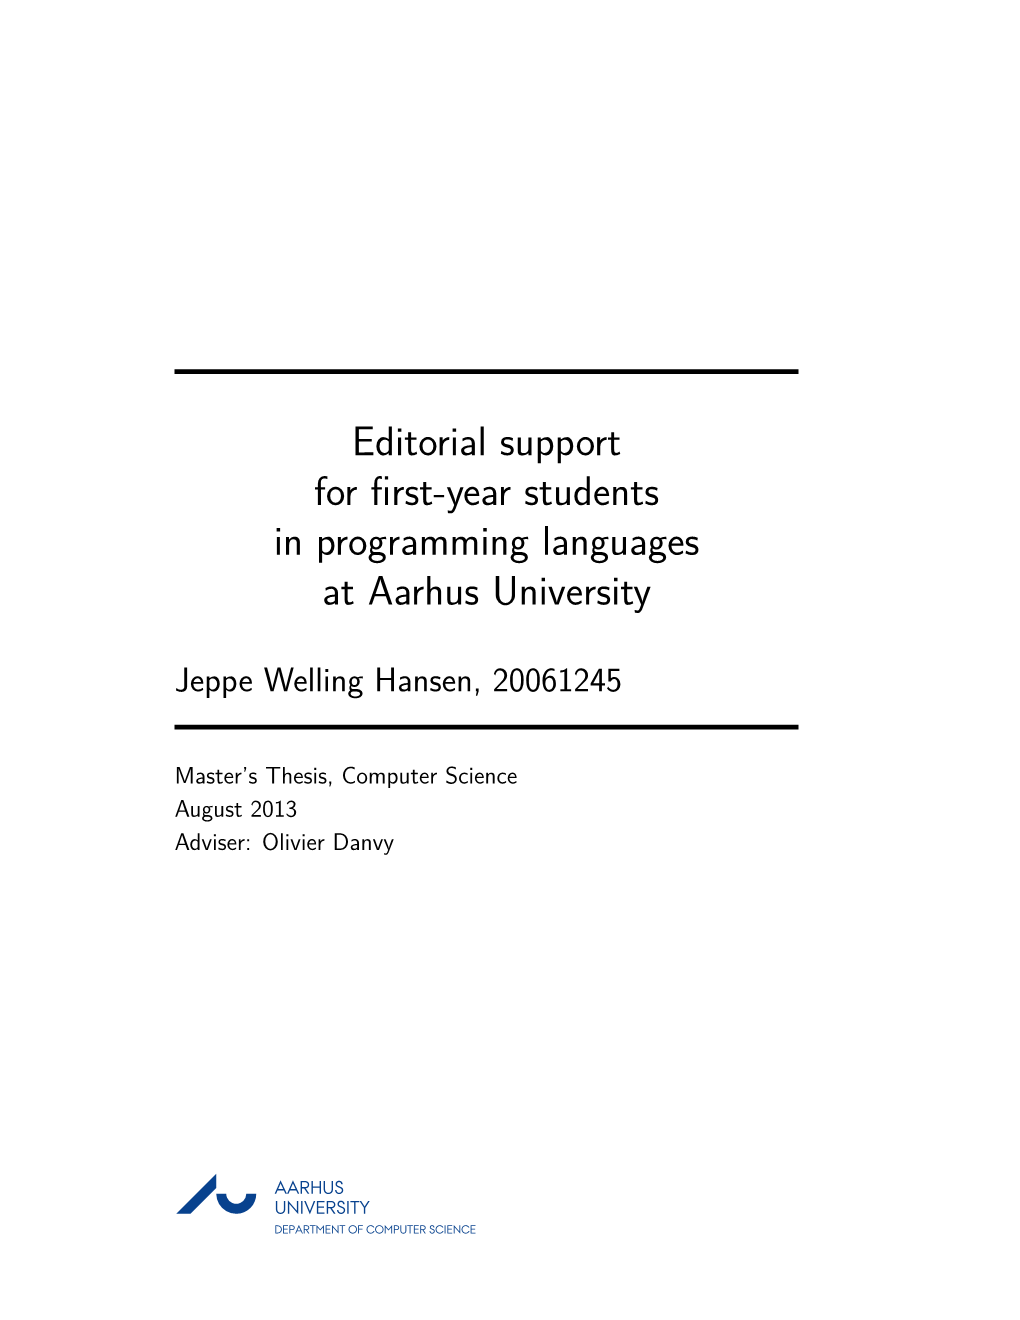 Editorial Support for First-Year Students in Programming Languages At